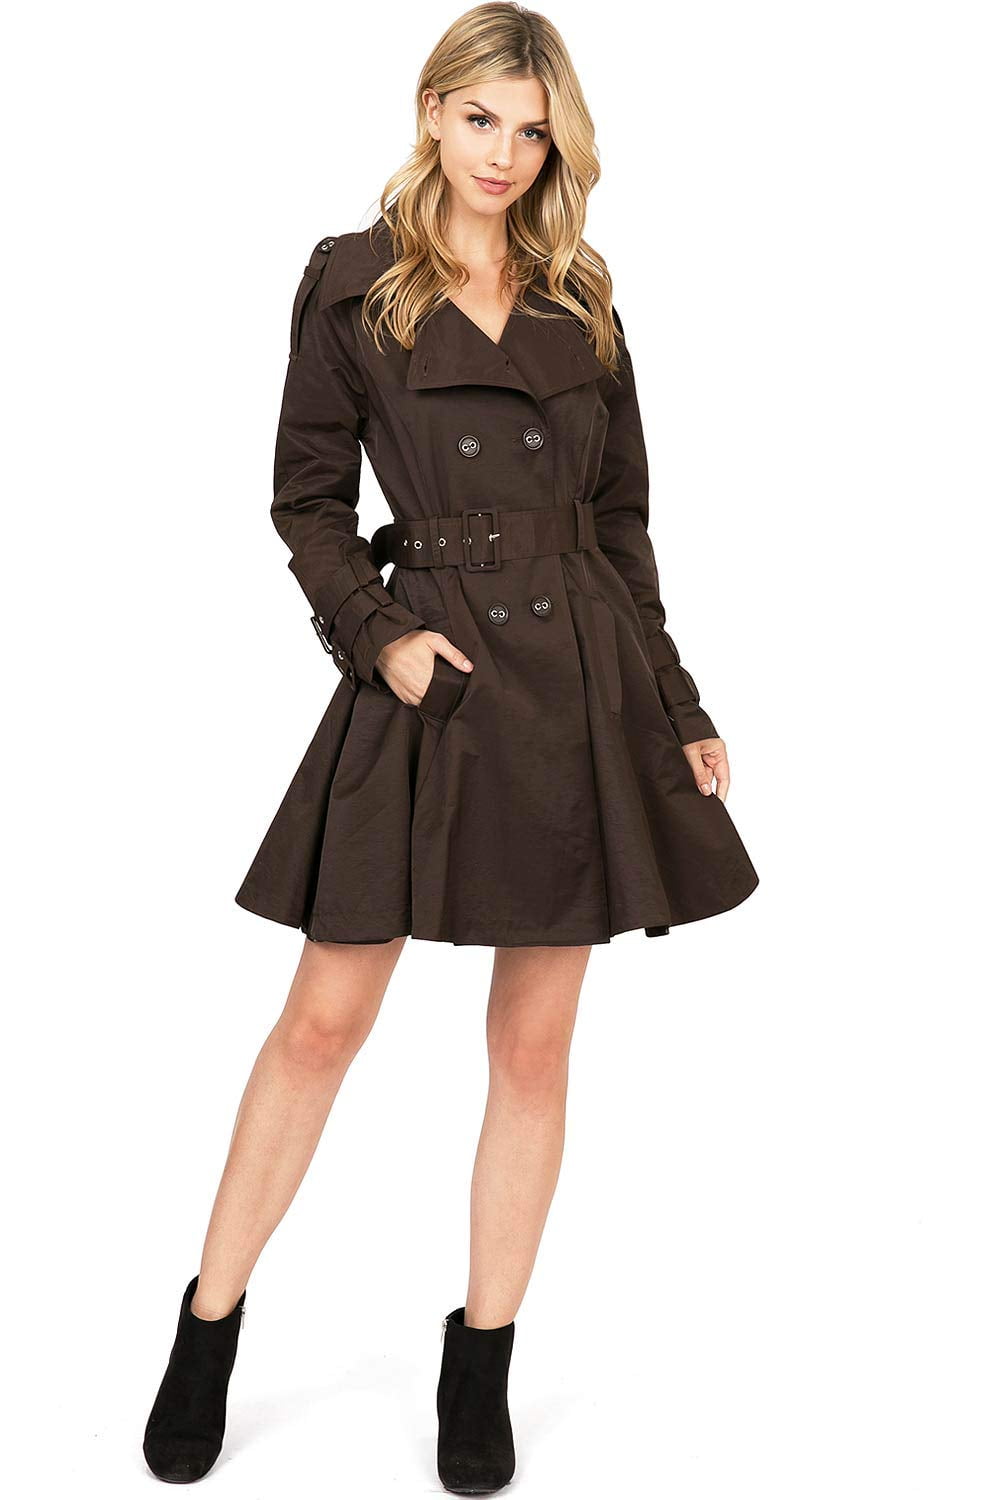 George Palomares Women's Water Resistant Trench Coat Dress (Brown, L)